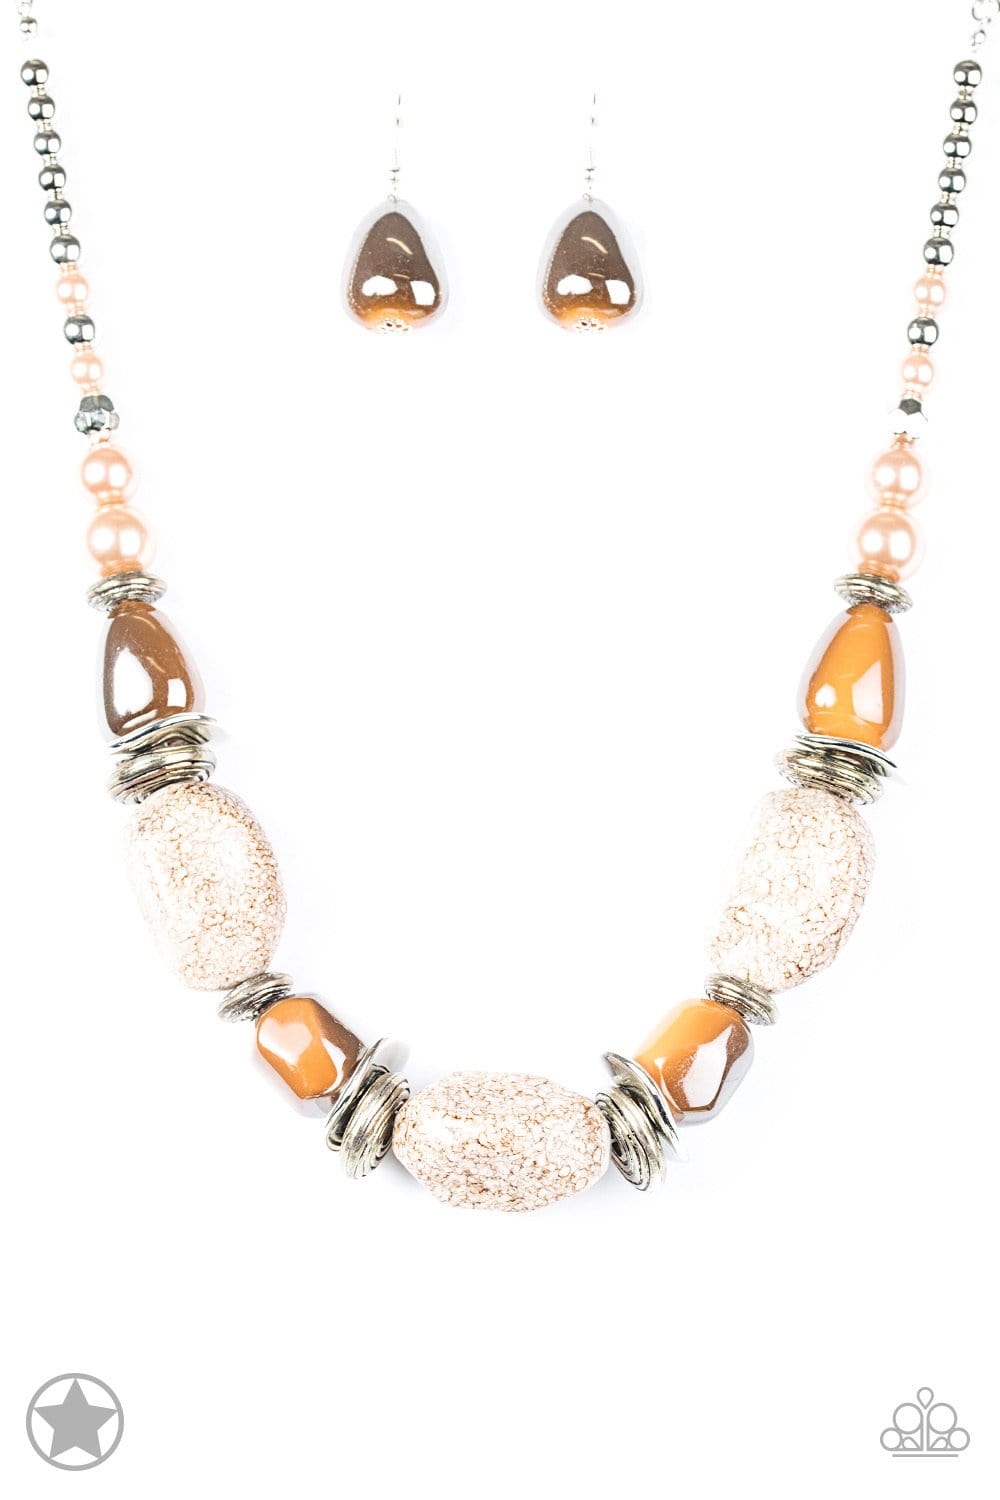 Paparazzi BLOCKBUSTERS: In Good Glazes - Peach Necklace - Jewels N’ Thingz Boutique